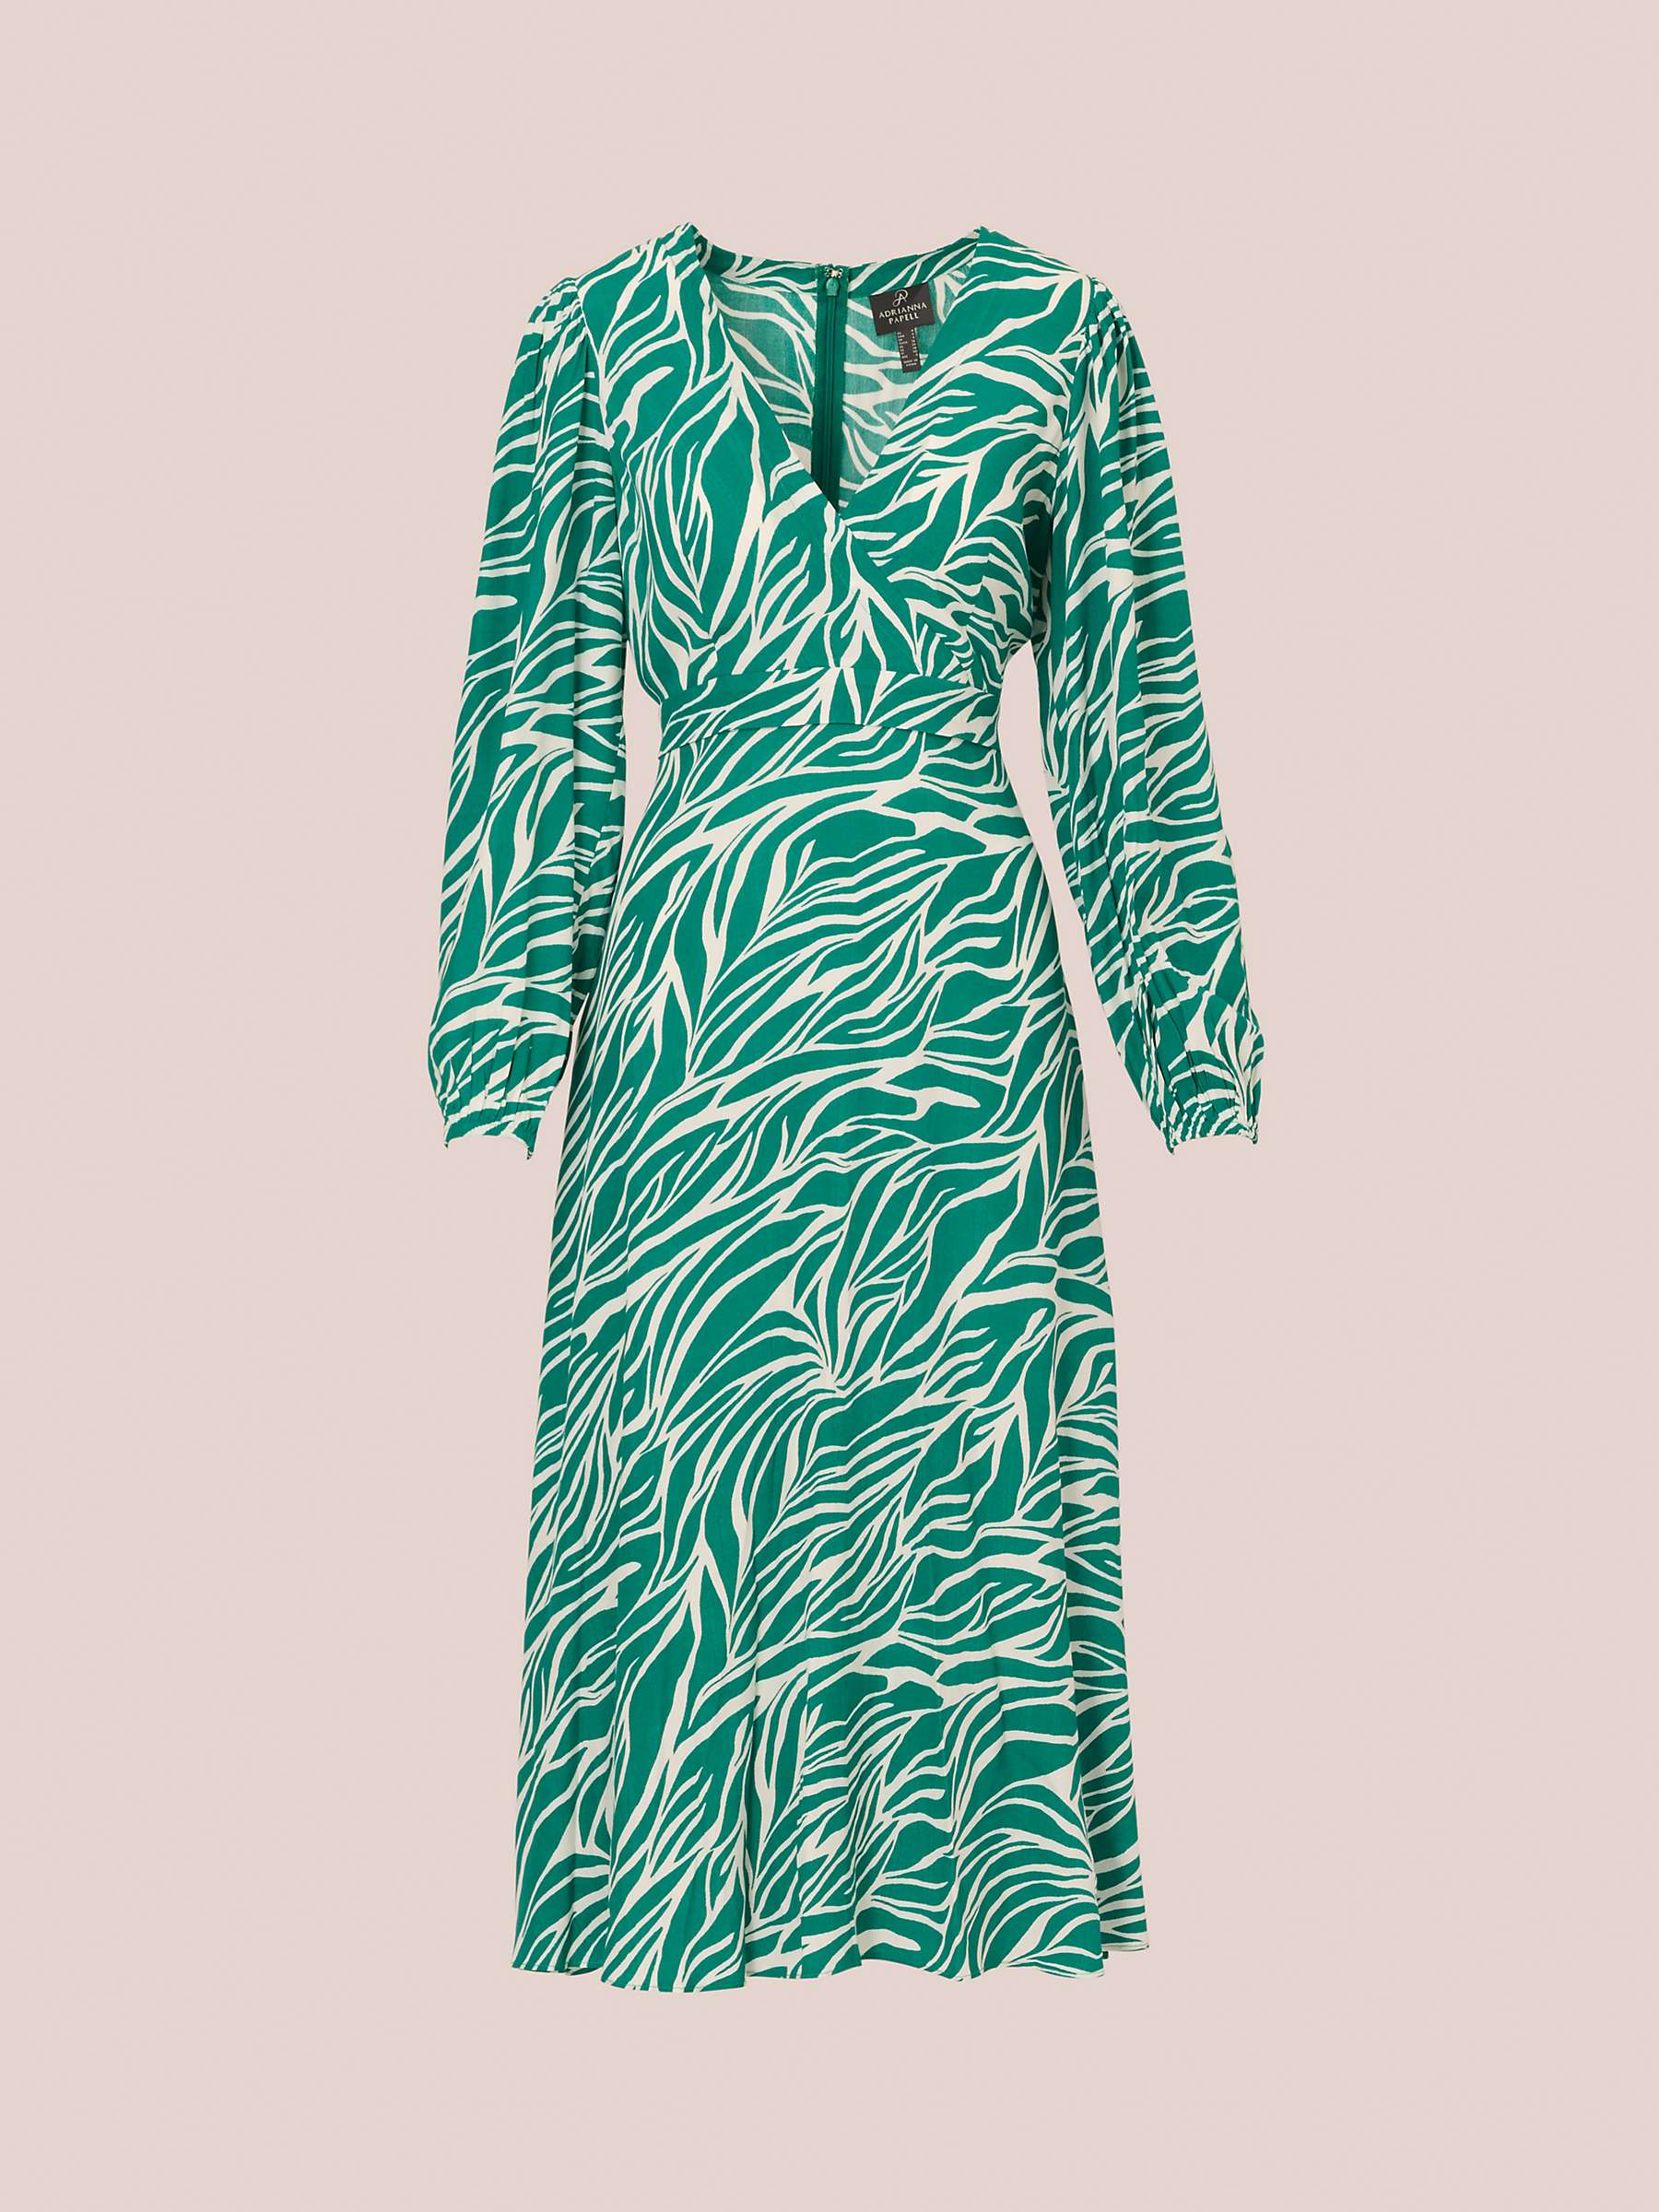 Buy Adrianna Papell Printed Midi Dress, Green/Ivory Online at johnlewis.com